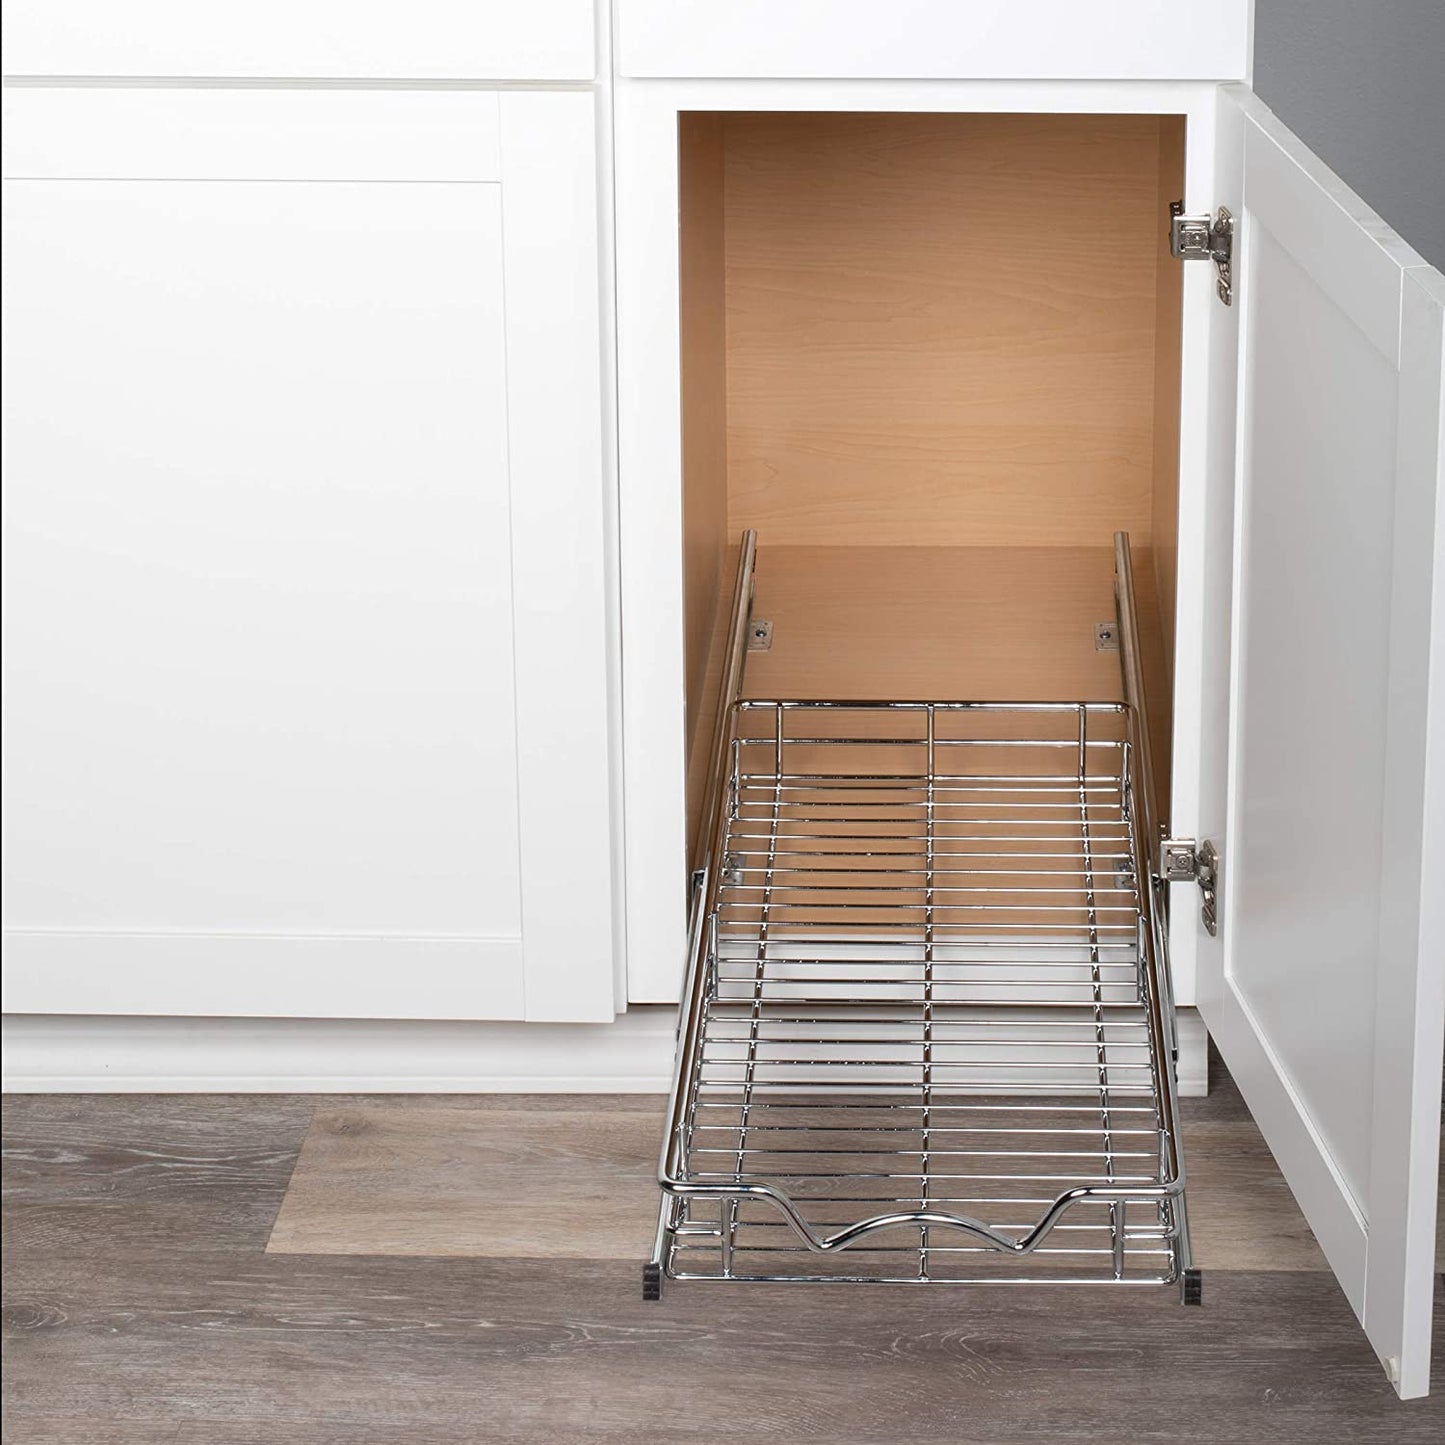 Hold N’ Storage Pull Out Cabinet Drawer Organizer Slide Out Shelves, -11”W x 21”D - Requires At Least a 12-1/4” Cabinet Opening - elpetersondesign